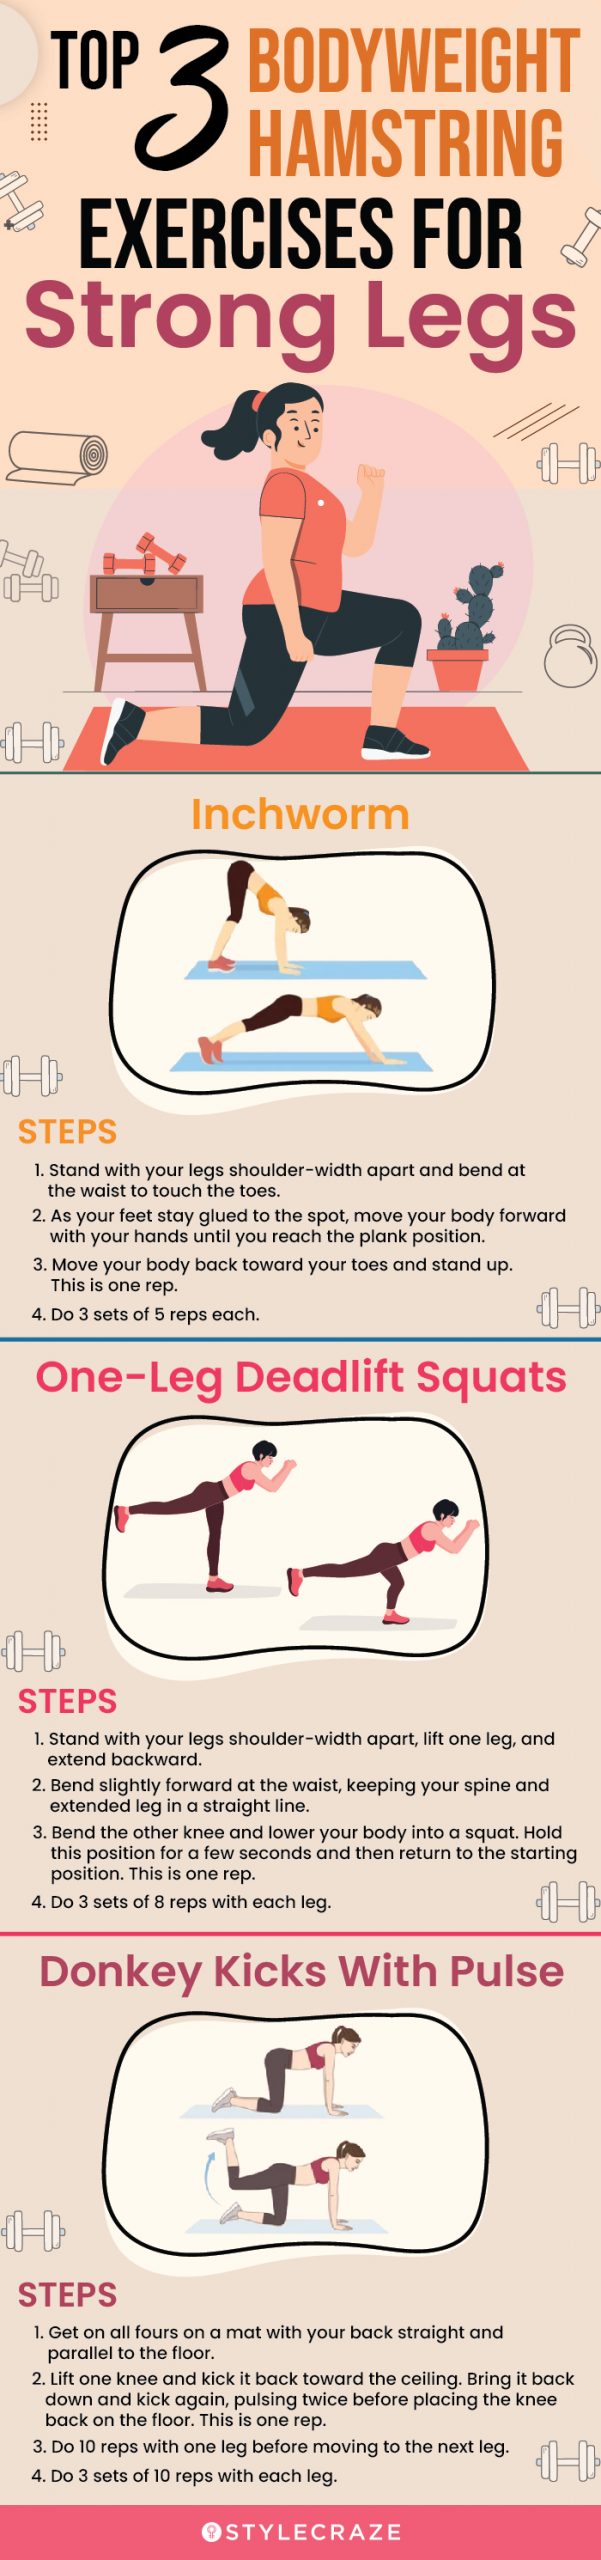 top 3 bodyweight hamstring exercises for strong legs (infographic)